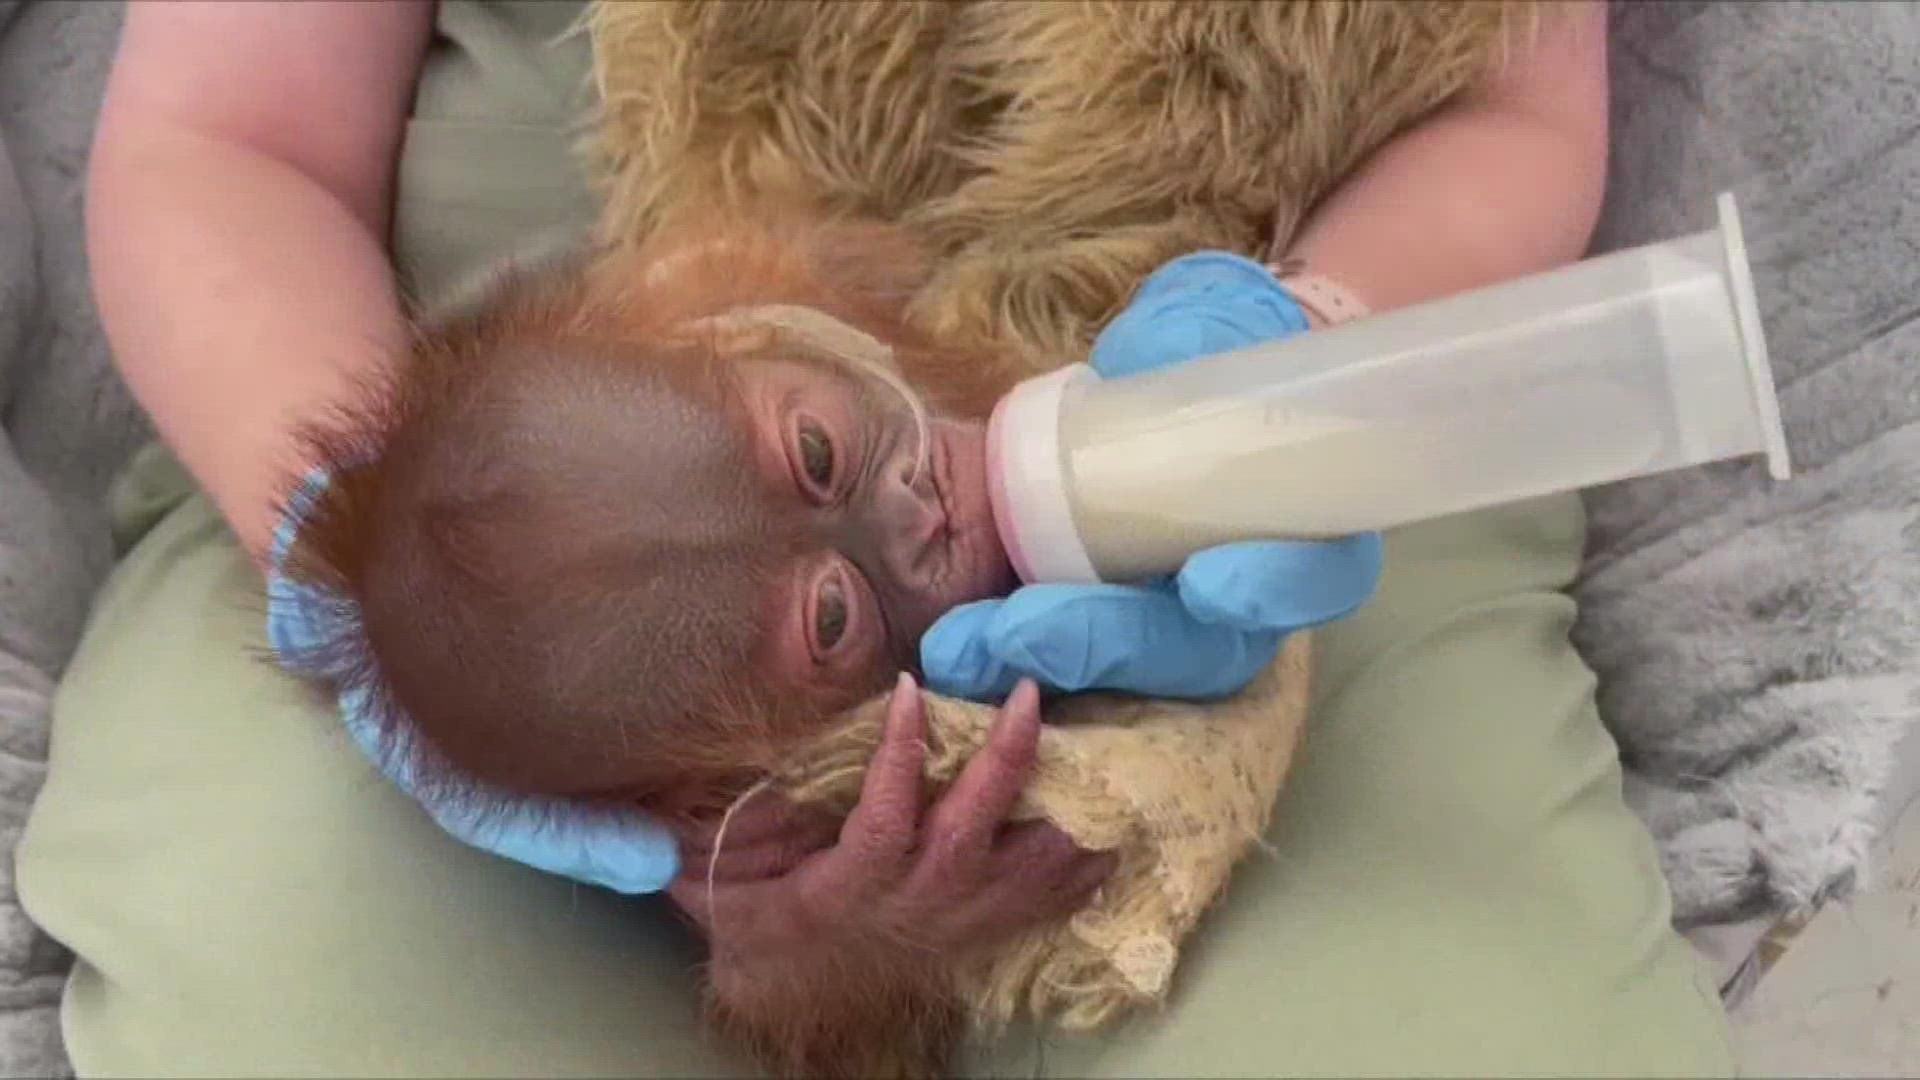 An Audubon Zoo spokeswoman says the unnamed baby was being tube-fed as well, but the tube was removed on Jan. 13